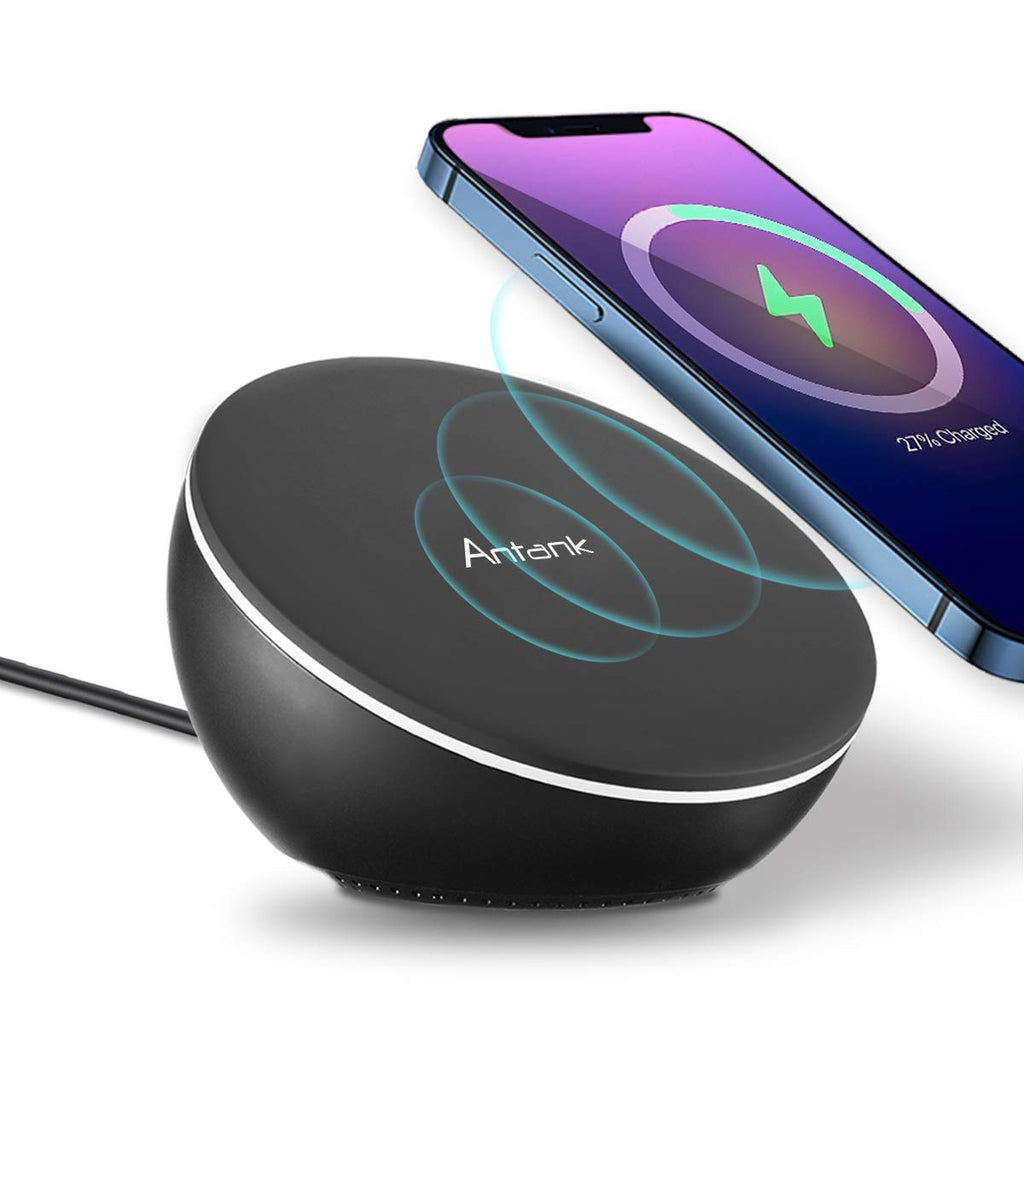 [Australia - AusPower] - Antank Magnetic Wireless Charger Compatible with iPhone 12/12 mini/12 Pro/12 Pro Max, Qi-Certified Fast Wireless Charger Charging Stand for iPhone 13 Series, USB C & USB A Port, No AC Adapter, Black 